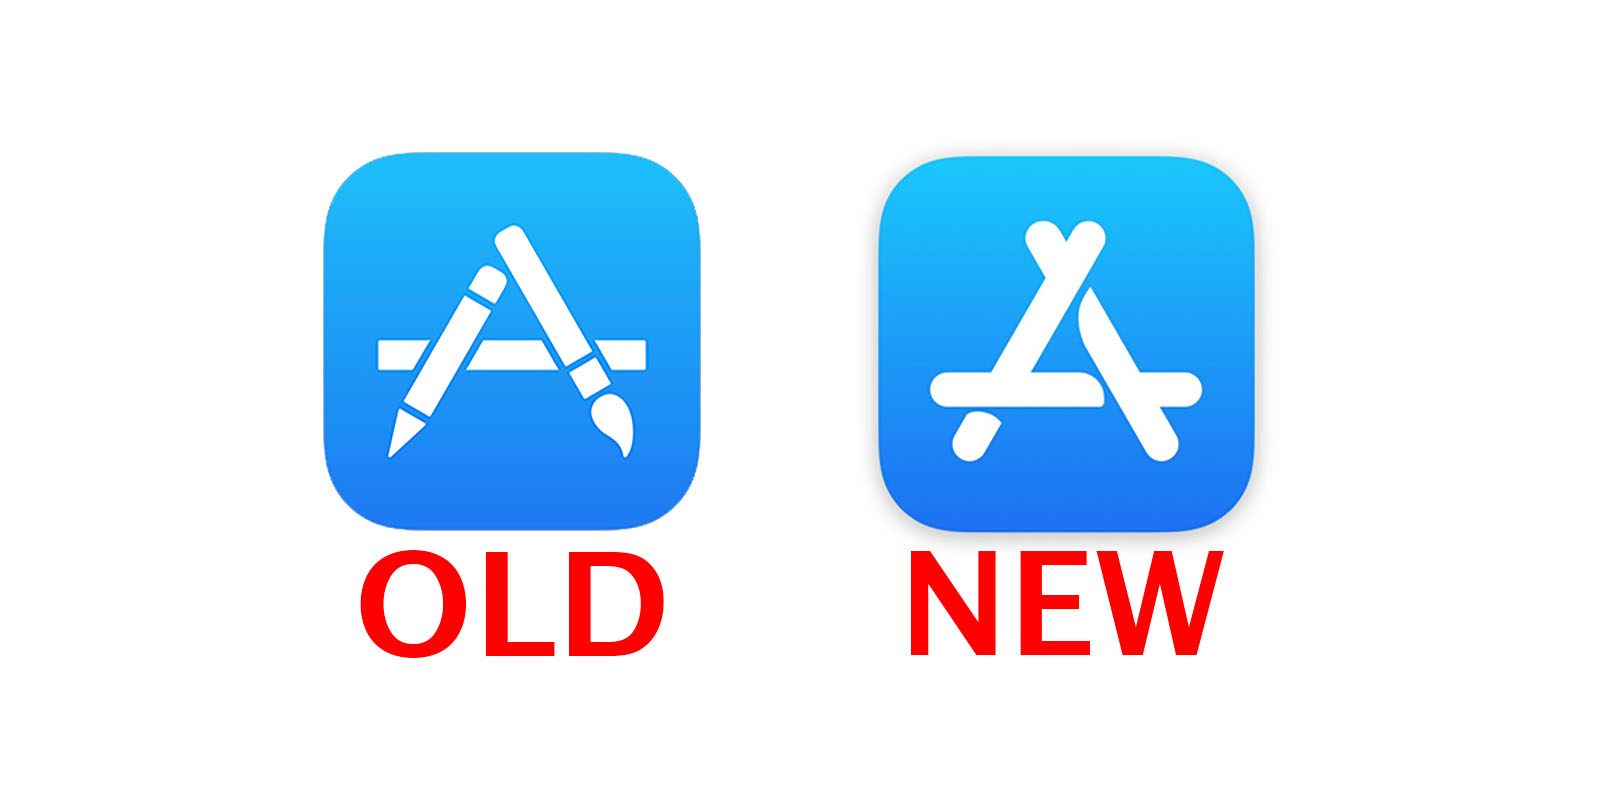 apple-just-changed-the-app-store-icon-for-the-first-time-in-years